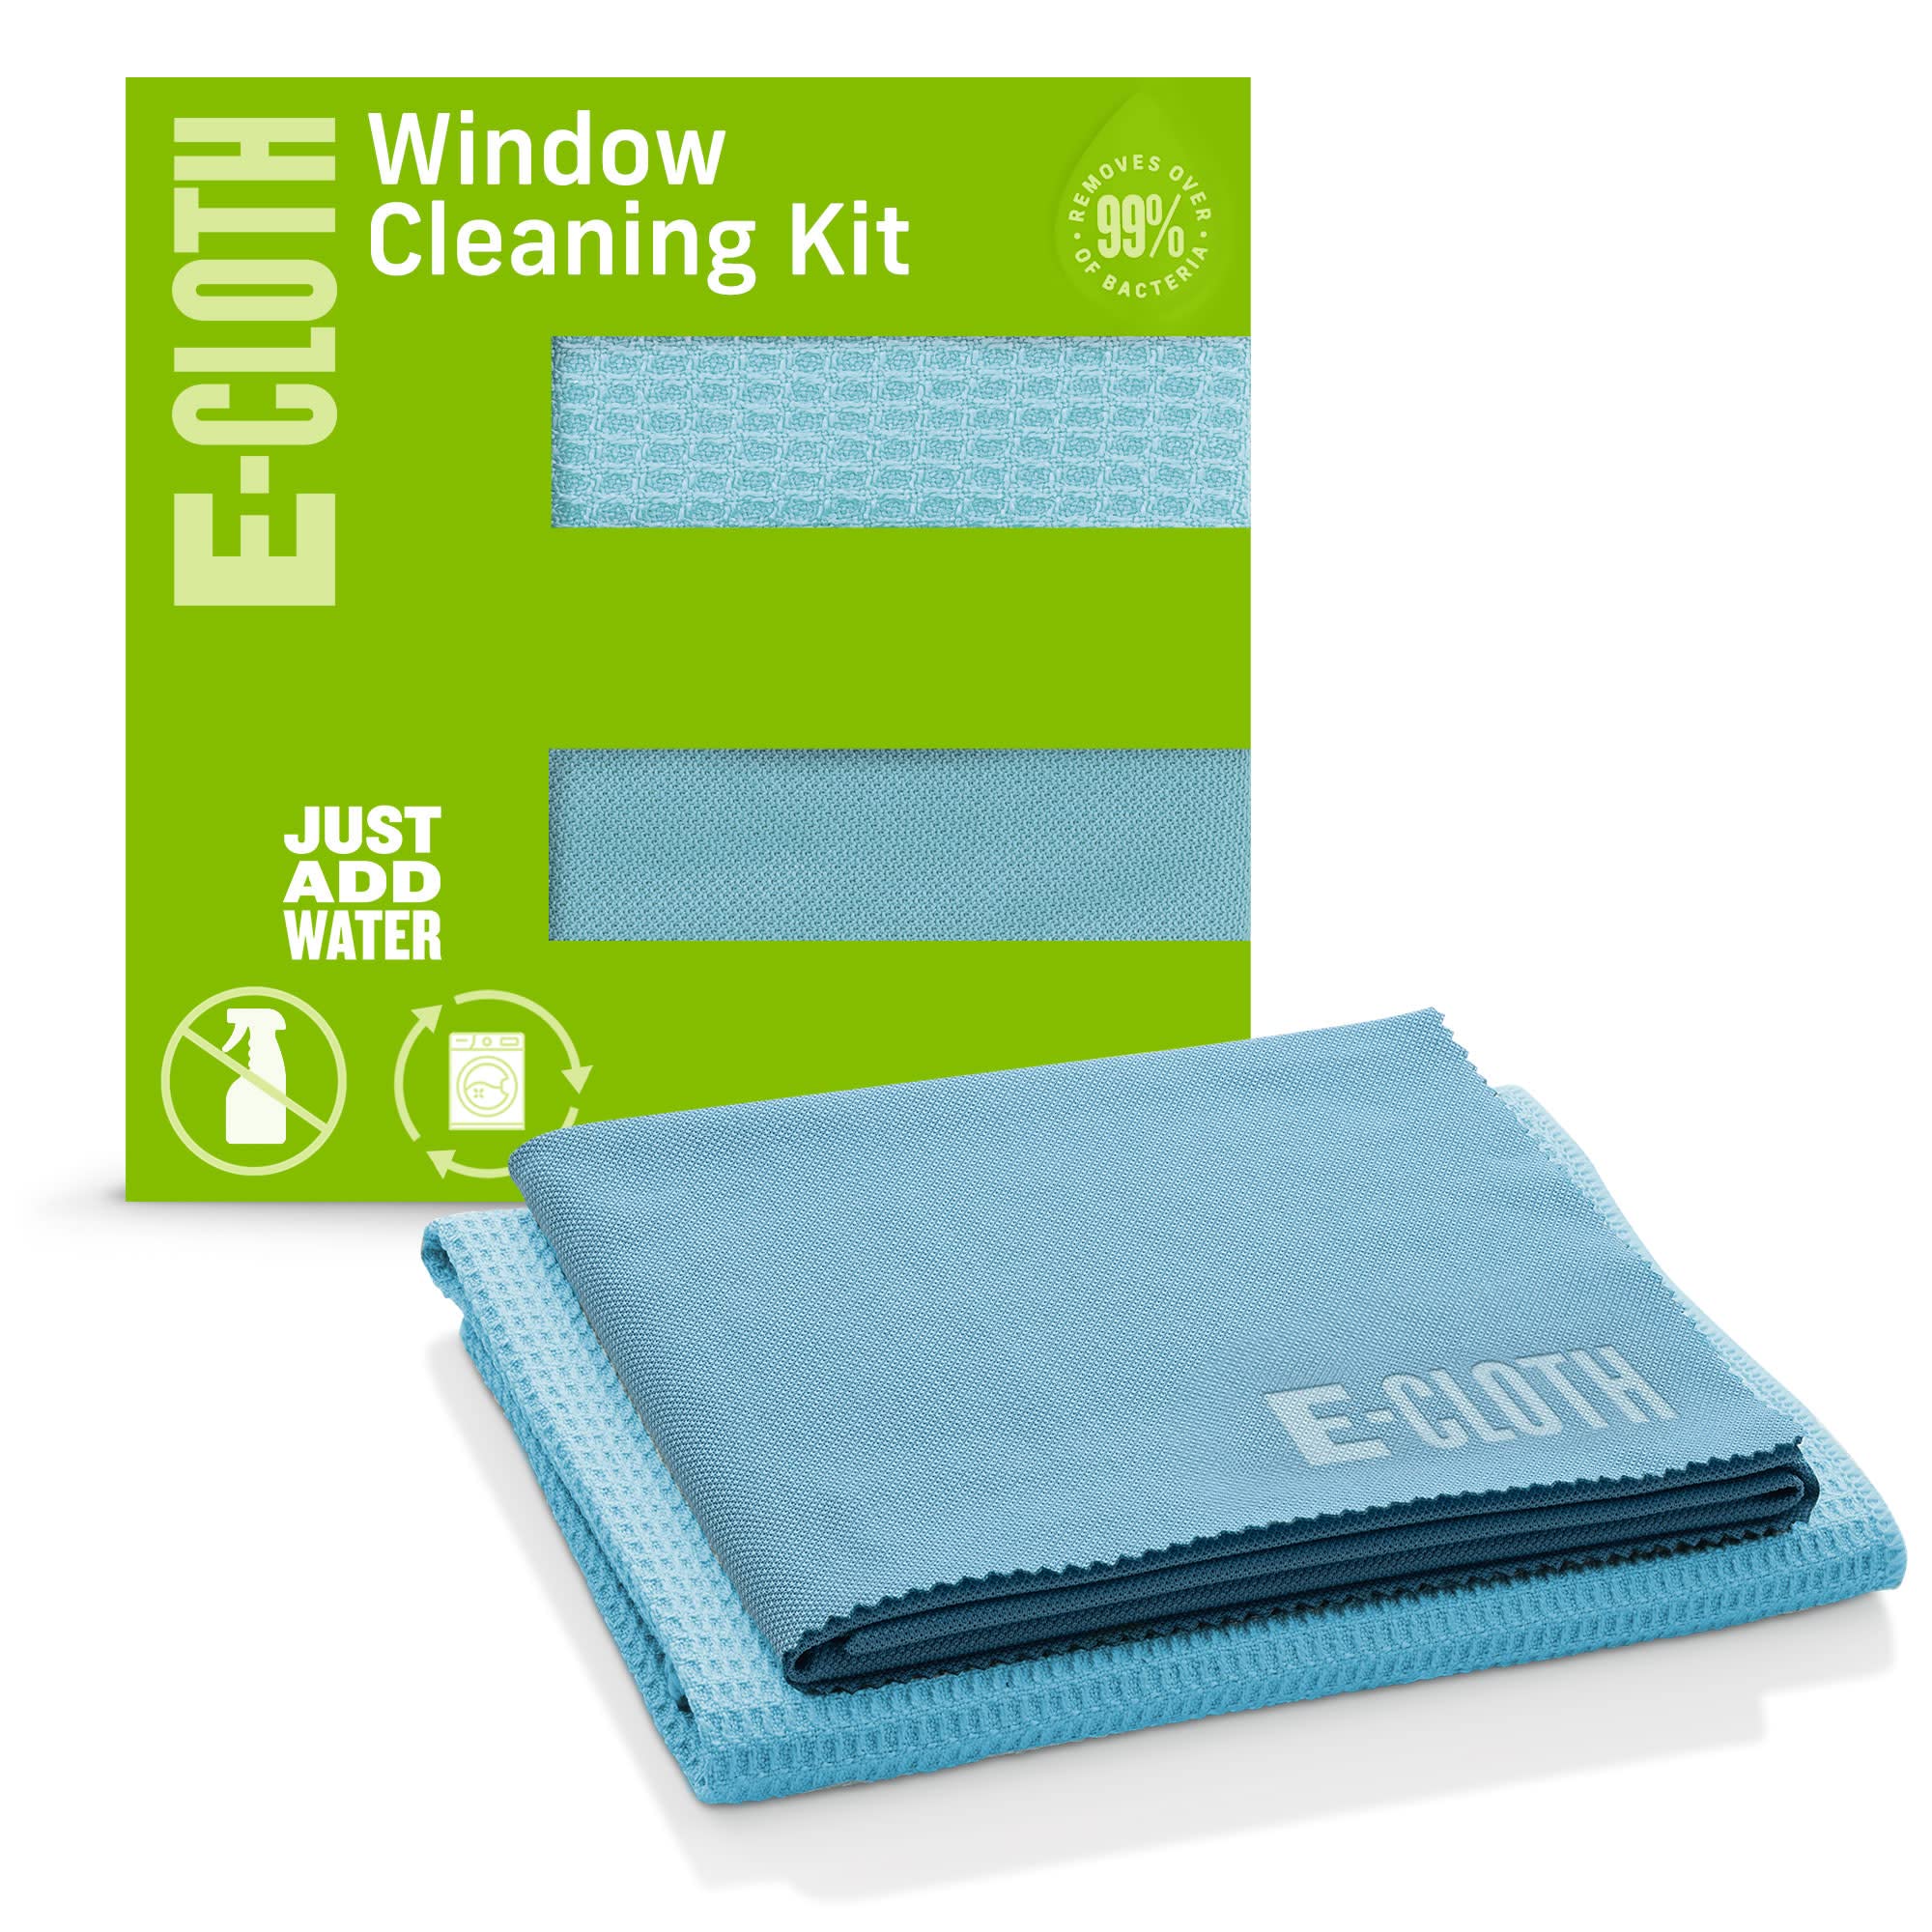 E-Cloth Microfiber Cleaning Cloth Glass Kit - Microfiber Towel Window Cleaning Kit - Microfiber Towels for Cars, Windows, Mirrors, & More - Alaskan Blue